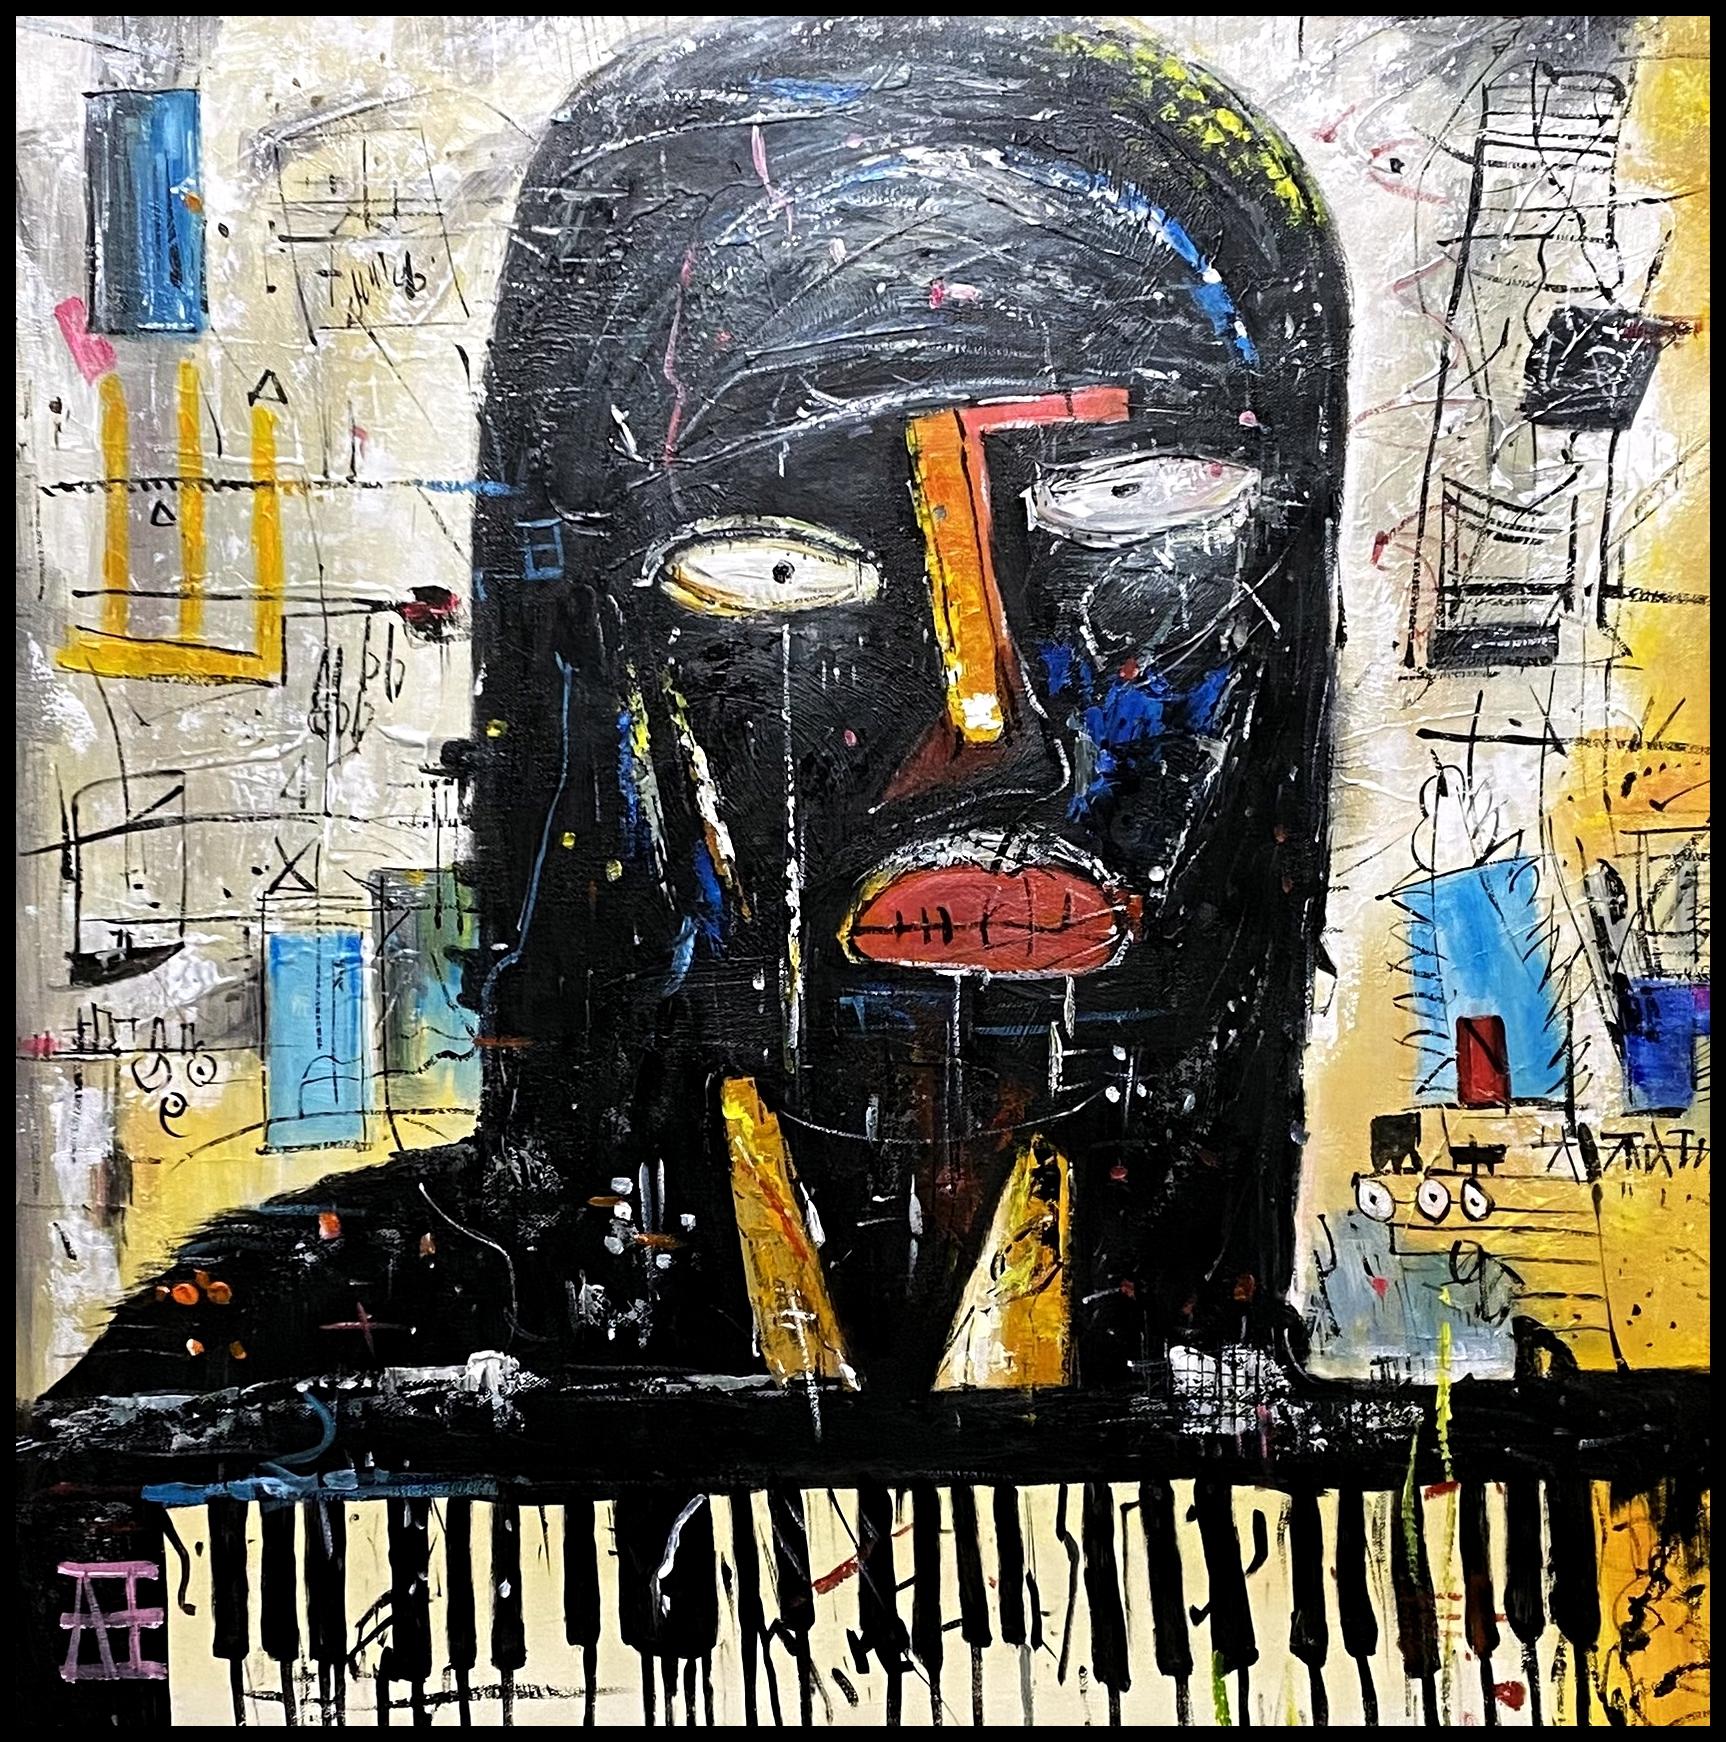 MUSIC OBSESSION - Painting by ZEE